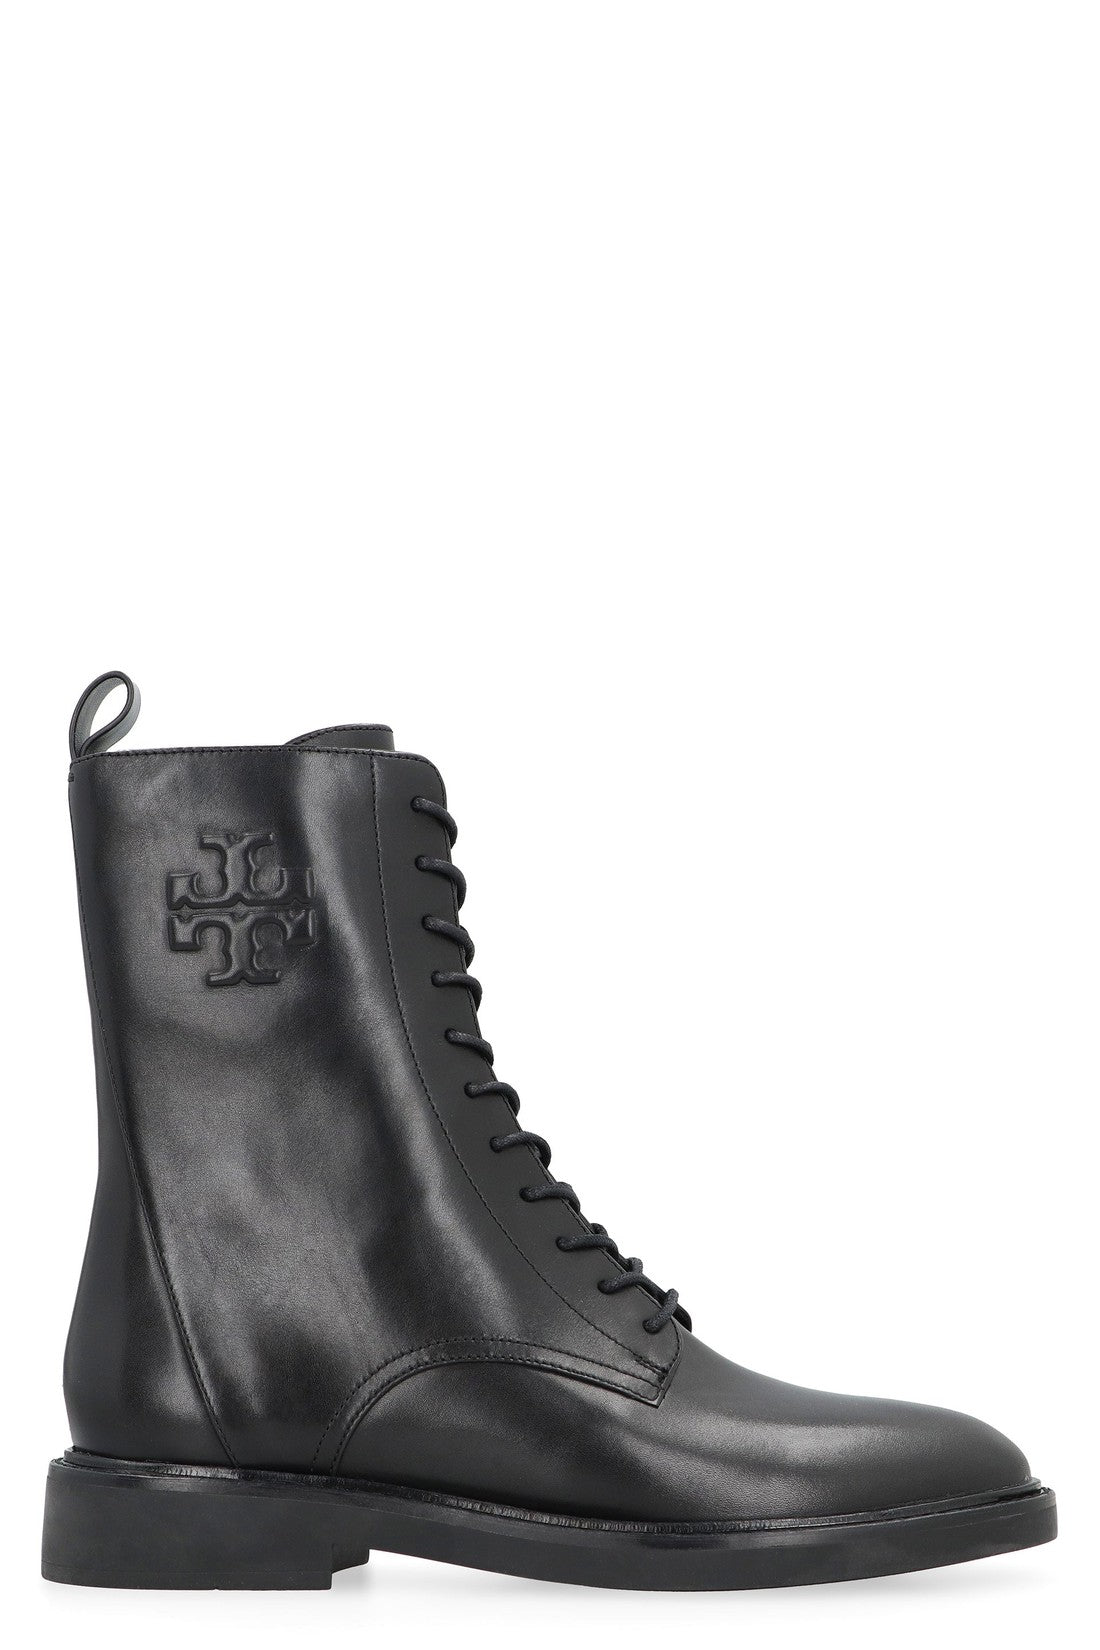 Tory Burch-OUTLET-SALE-Leather lace-up boots-ARCHIVIST